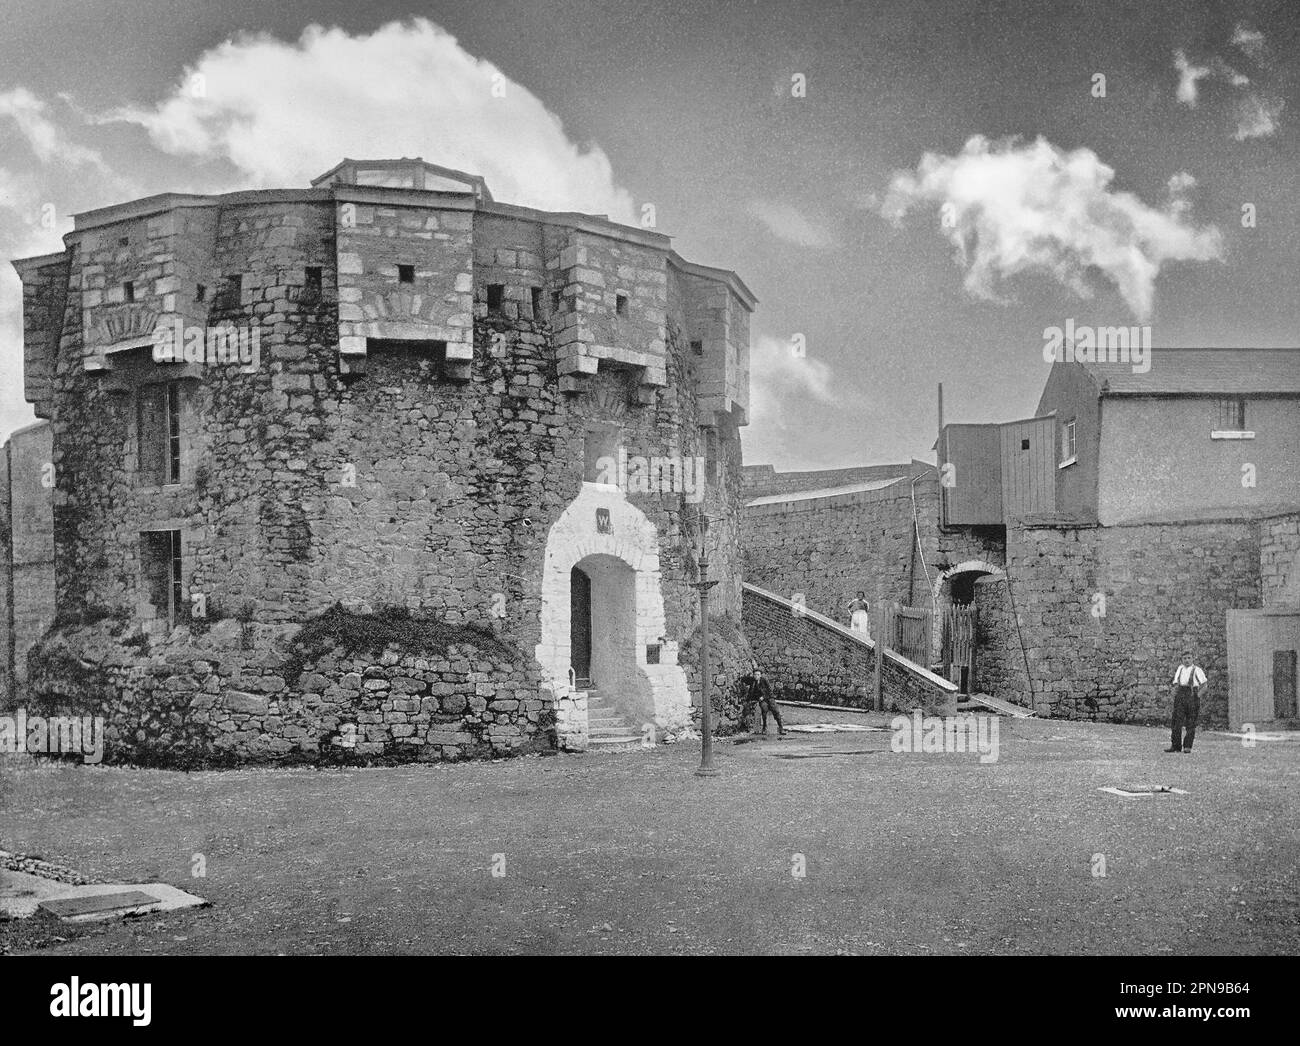 A late 19th century view of Athlone Castle, sometimes known as Adamson Castle, in Athlone, County Westmeath, Ireland. The stone castle dates from 1210 and was built for King John by his Irish Justiciar, Bishop John de Gray of Norwich. It was built to defend the crossing point of the river at Athlone and to provide a bridgehead to facilitate the Norman advance into Connaught. Originally the free-standing polygonal tower now greatly altered, was the central keep or ‘donjon’ of the castle. Stock Photo